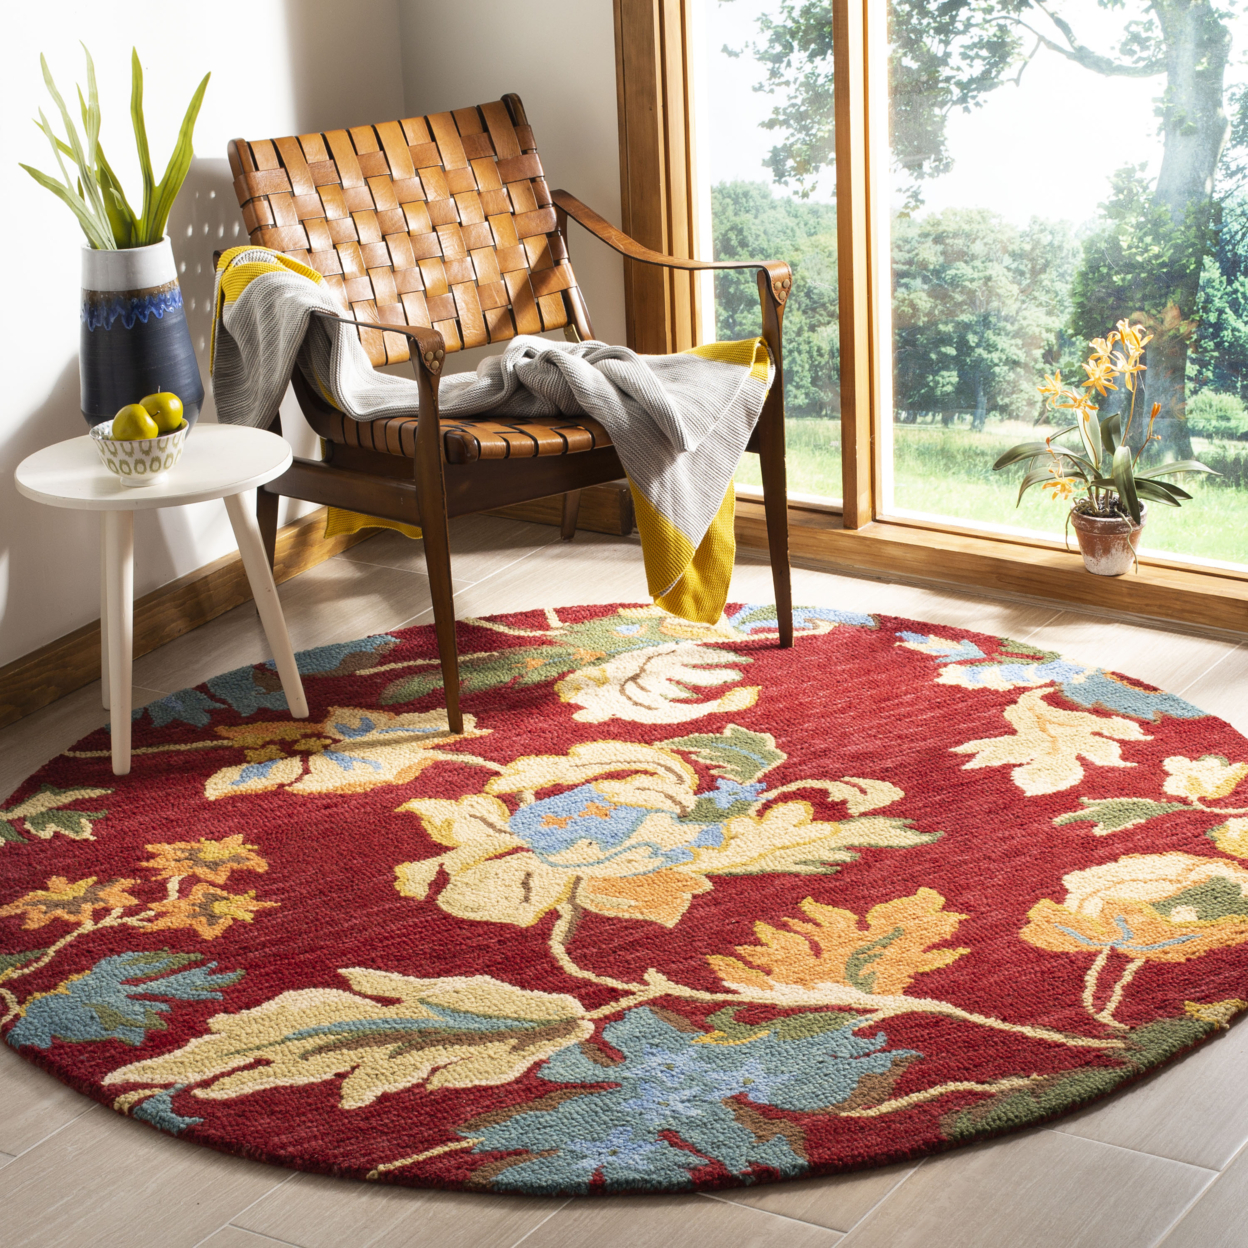 SAFAVIEH Blossom BLM672A Hand-hooked Red / Multi Rug - 6' Square